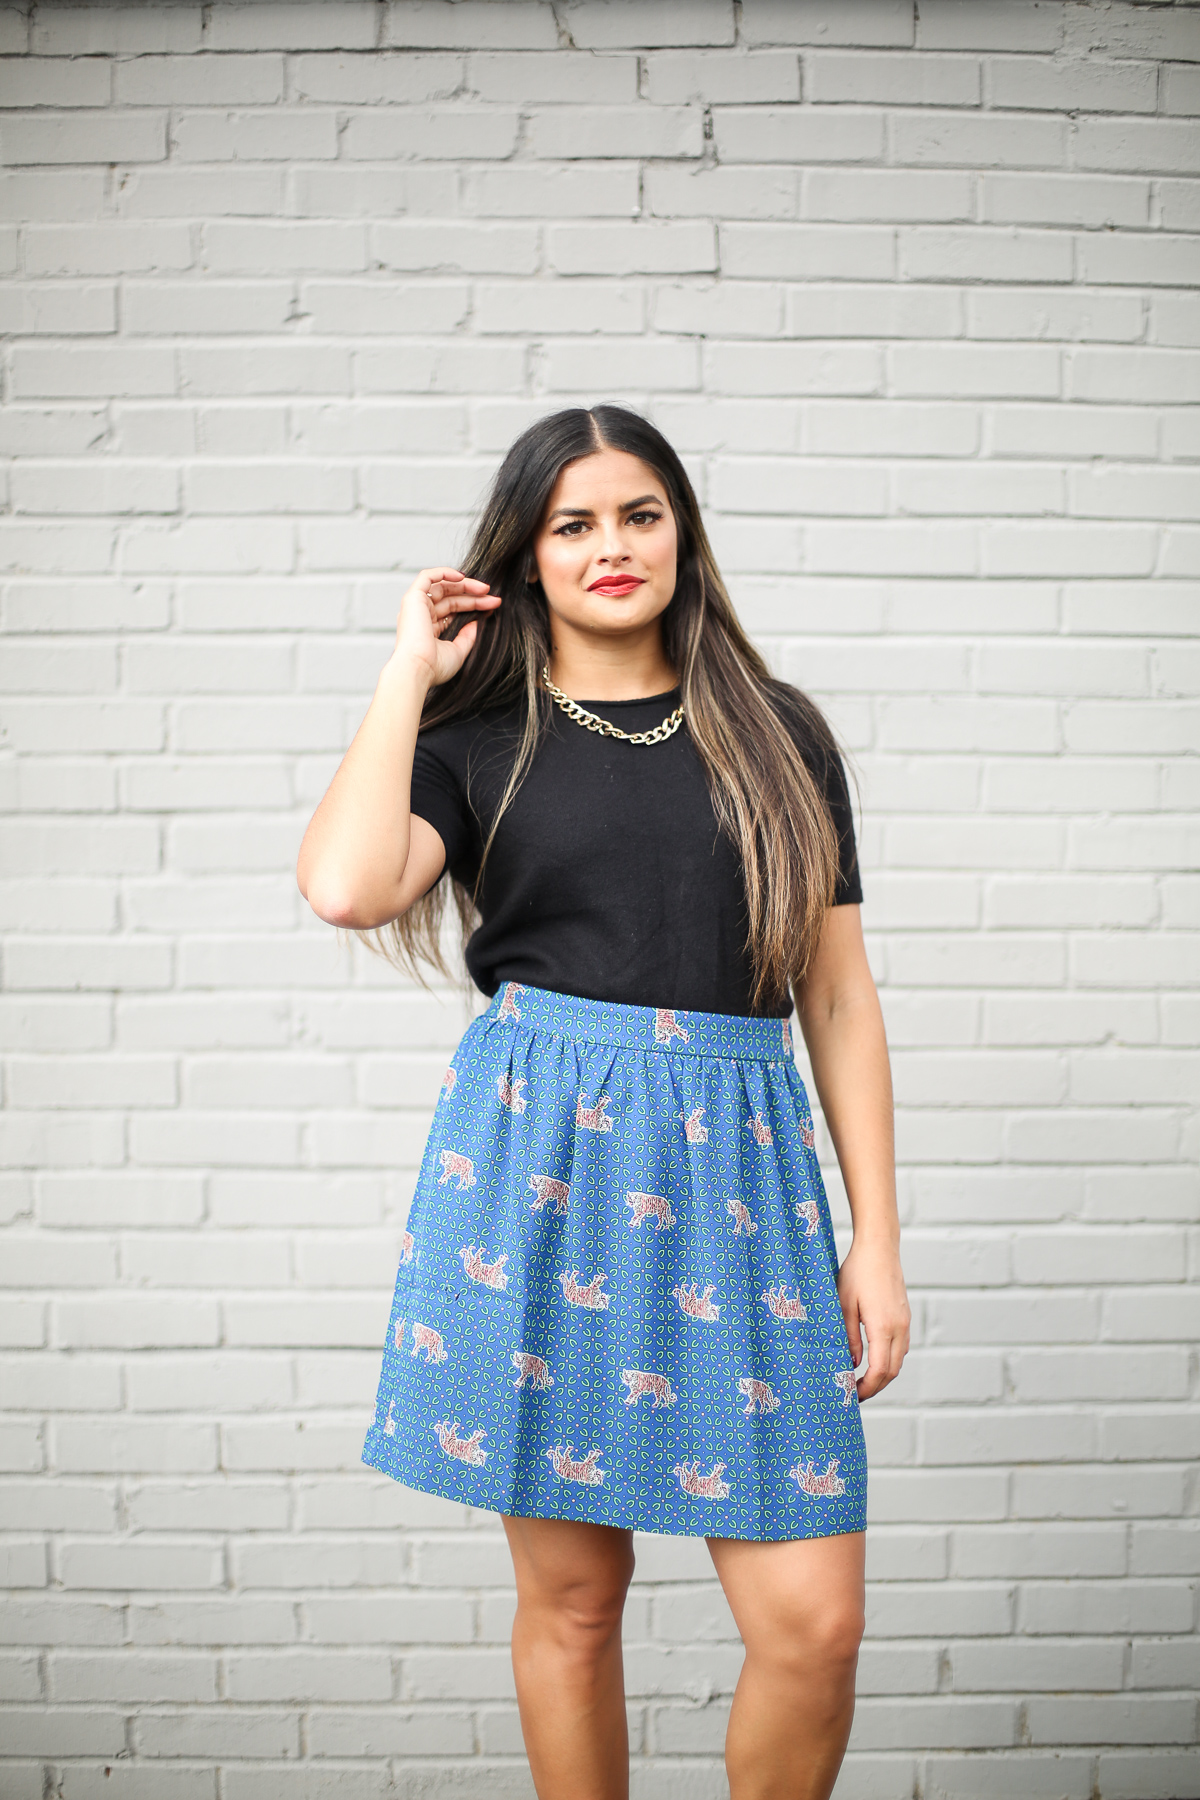 Priya the Blog, Nashville fashion blog, Nashville fashion blogger, Nashville style blog, Nashville style blogger, Fall outfit with graphic skirt, J.Crew tiger skirt, Zara block bow heels, wear to work outfit for Fall, how to wear a chunky gold chain necklace, J.Crew Factory tiger skirt, Fall office outfit, Fall fashion, Zara heels